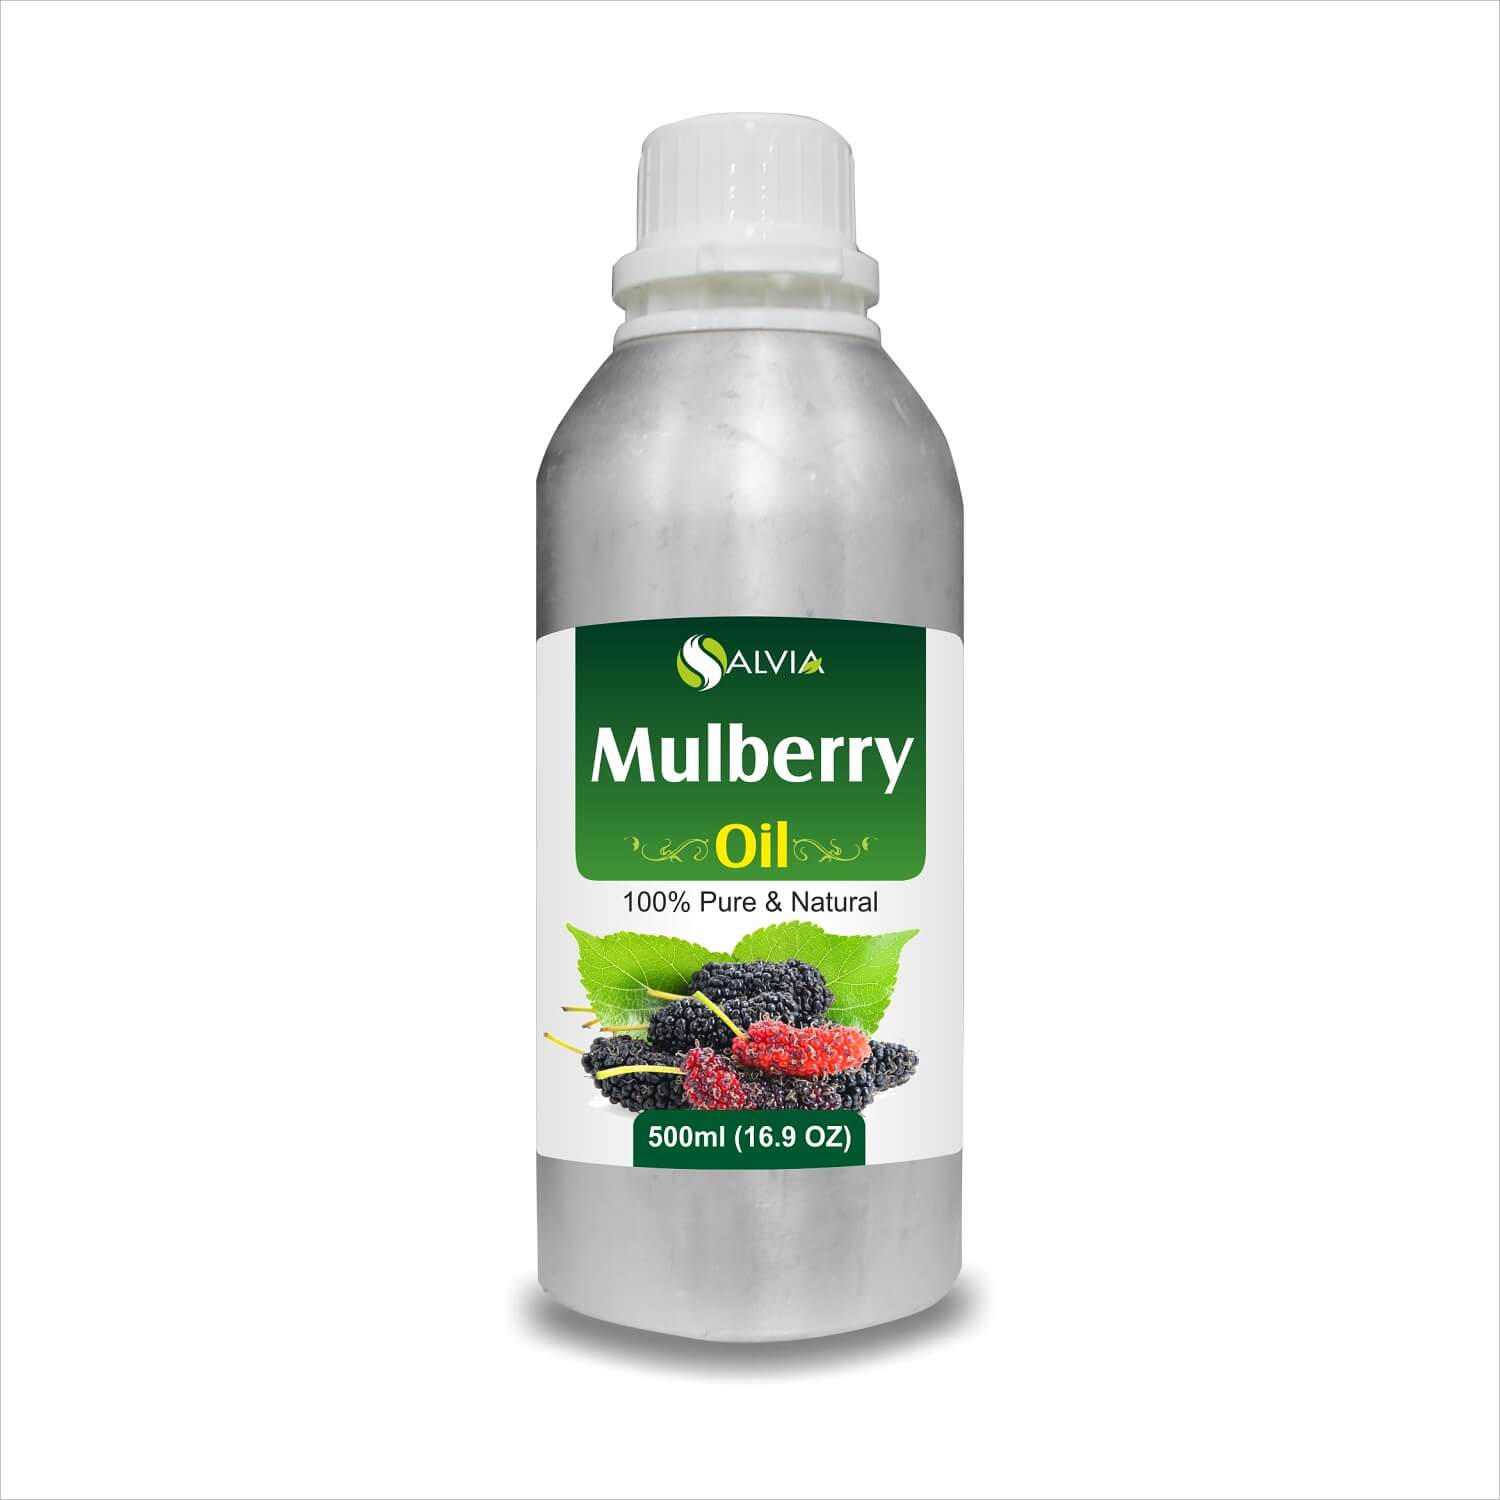 Salvia Natural Essential Oils 500ml Mulberry Oil (Morus alba) Pure, Natural And Cold Pressed Mulberry oil | For Diffusers, Soap Making, Candles, Lotion, Home Scents, Bath Bombs, DIY Homemade Products